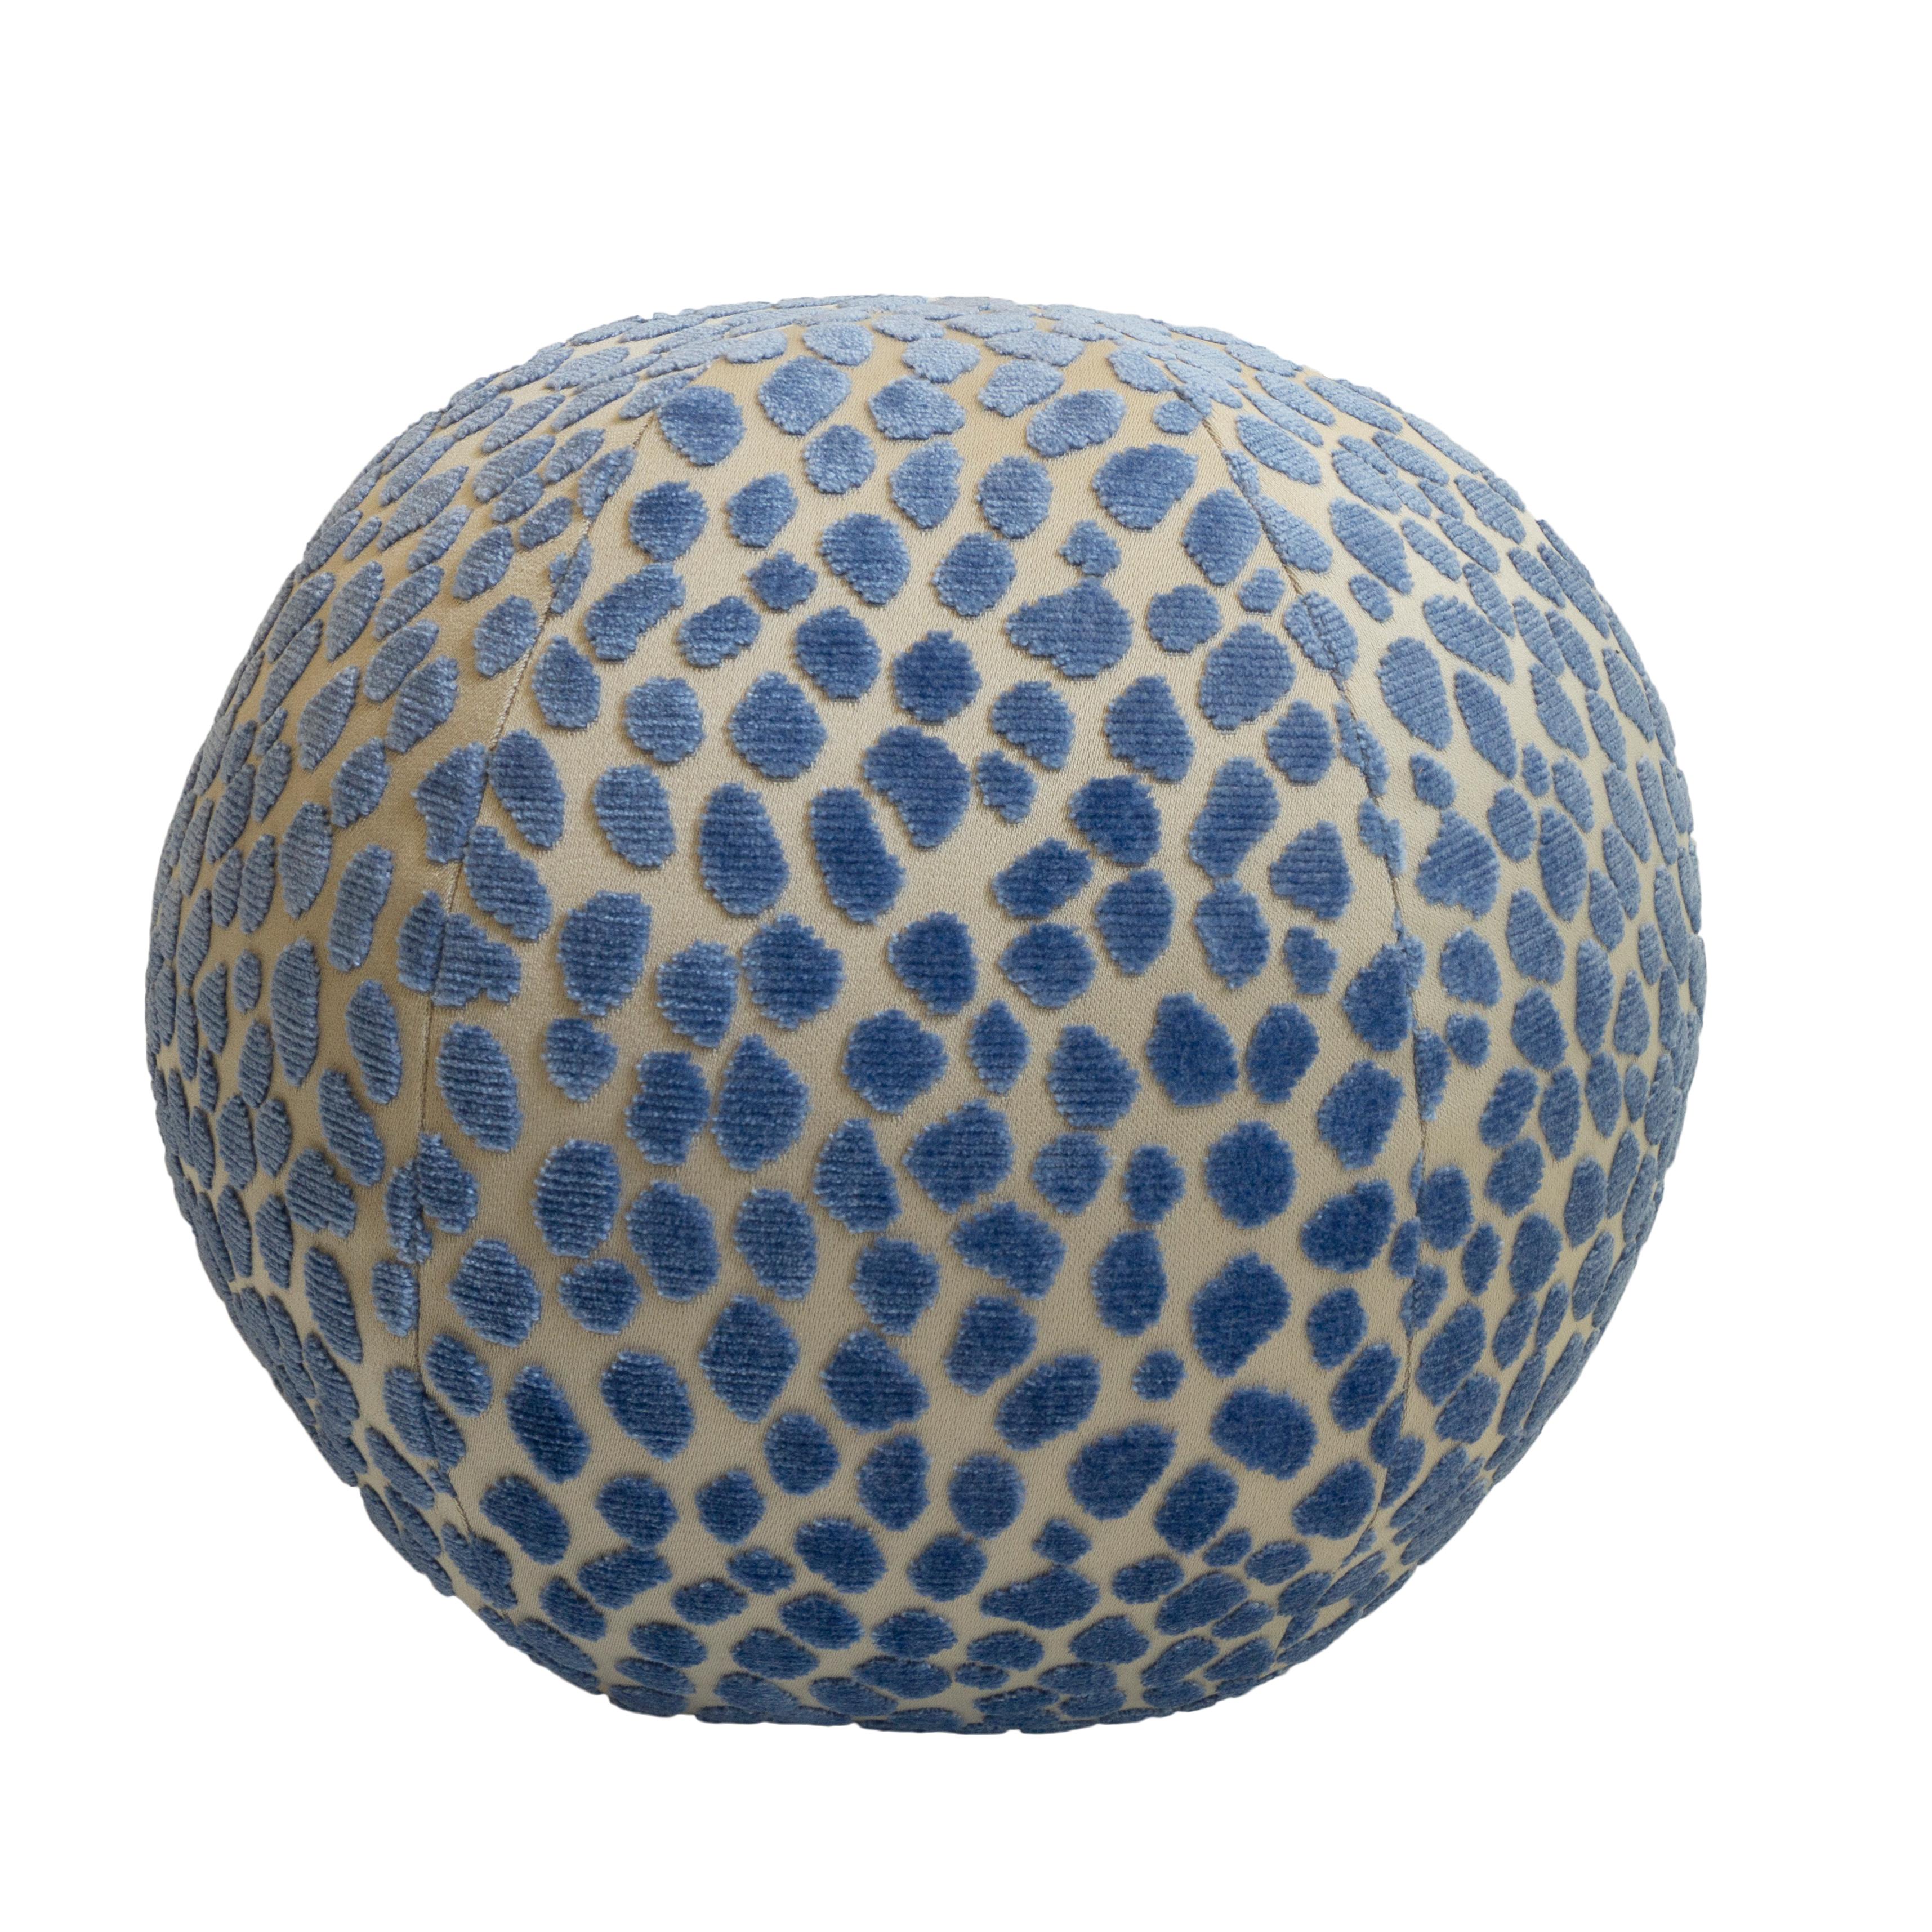 Our Samoa velvet ball pillow is made with Osborne and Little’s Tupai fabric which features an all-over pattern of jacquard velvet dots in vibrant light blue. All pillows are handsewn at our studio in Norwalk, CT. 

Measurements:

9” H x 12’ W.